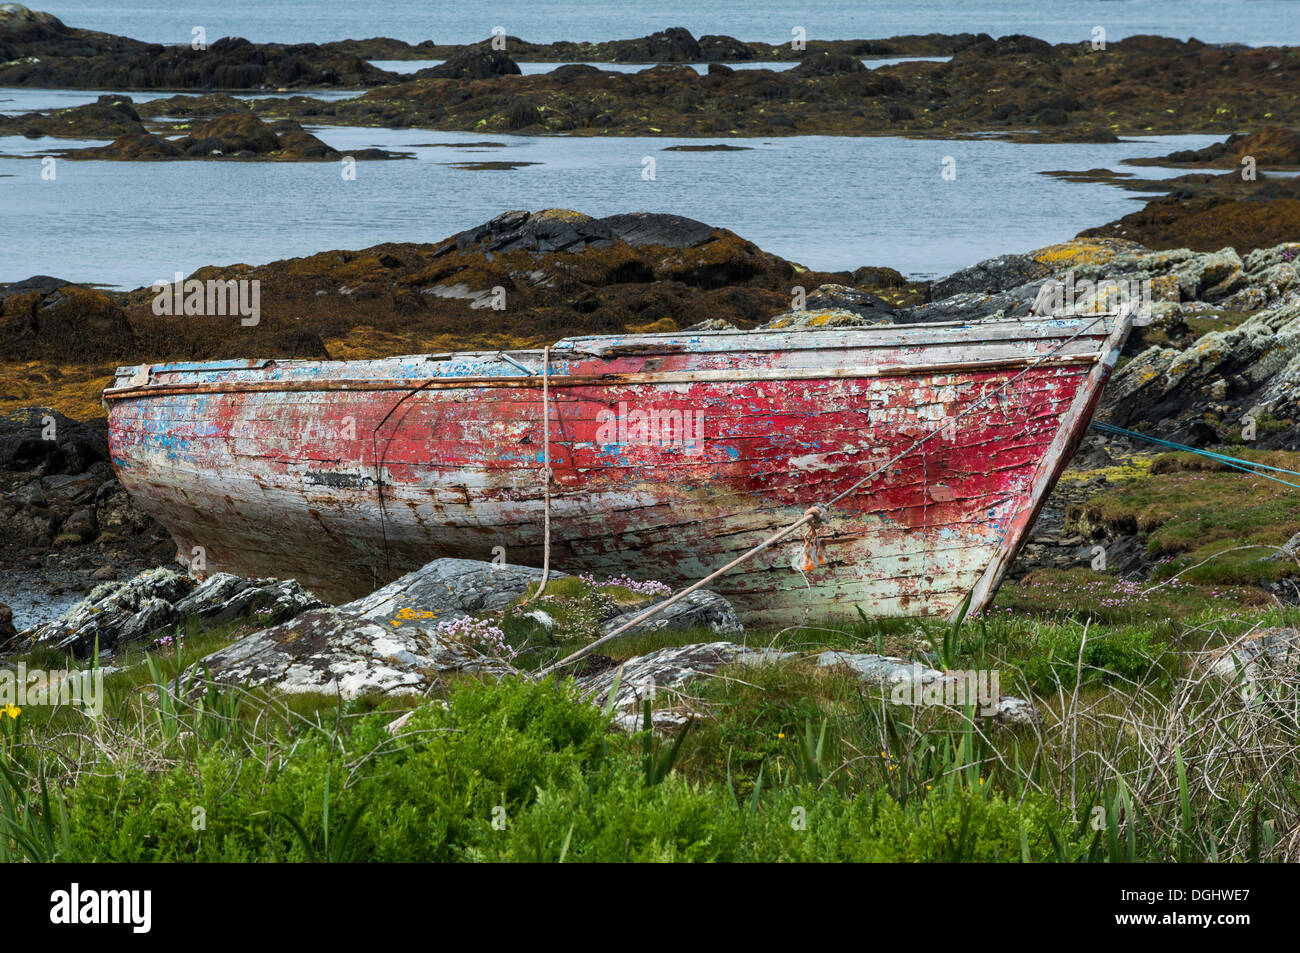 Old red wooden boat on the shore, Connemara, Ireland, Europe Stock Photo